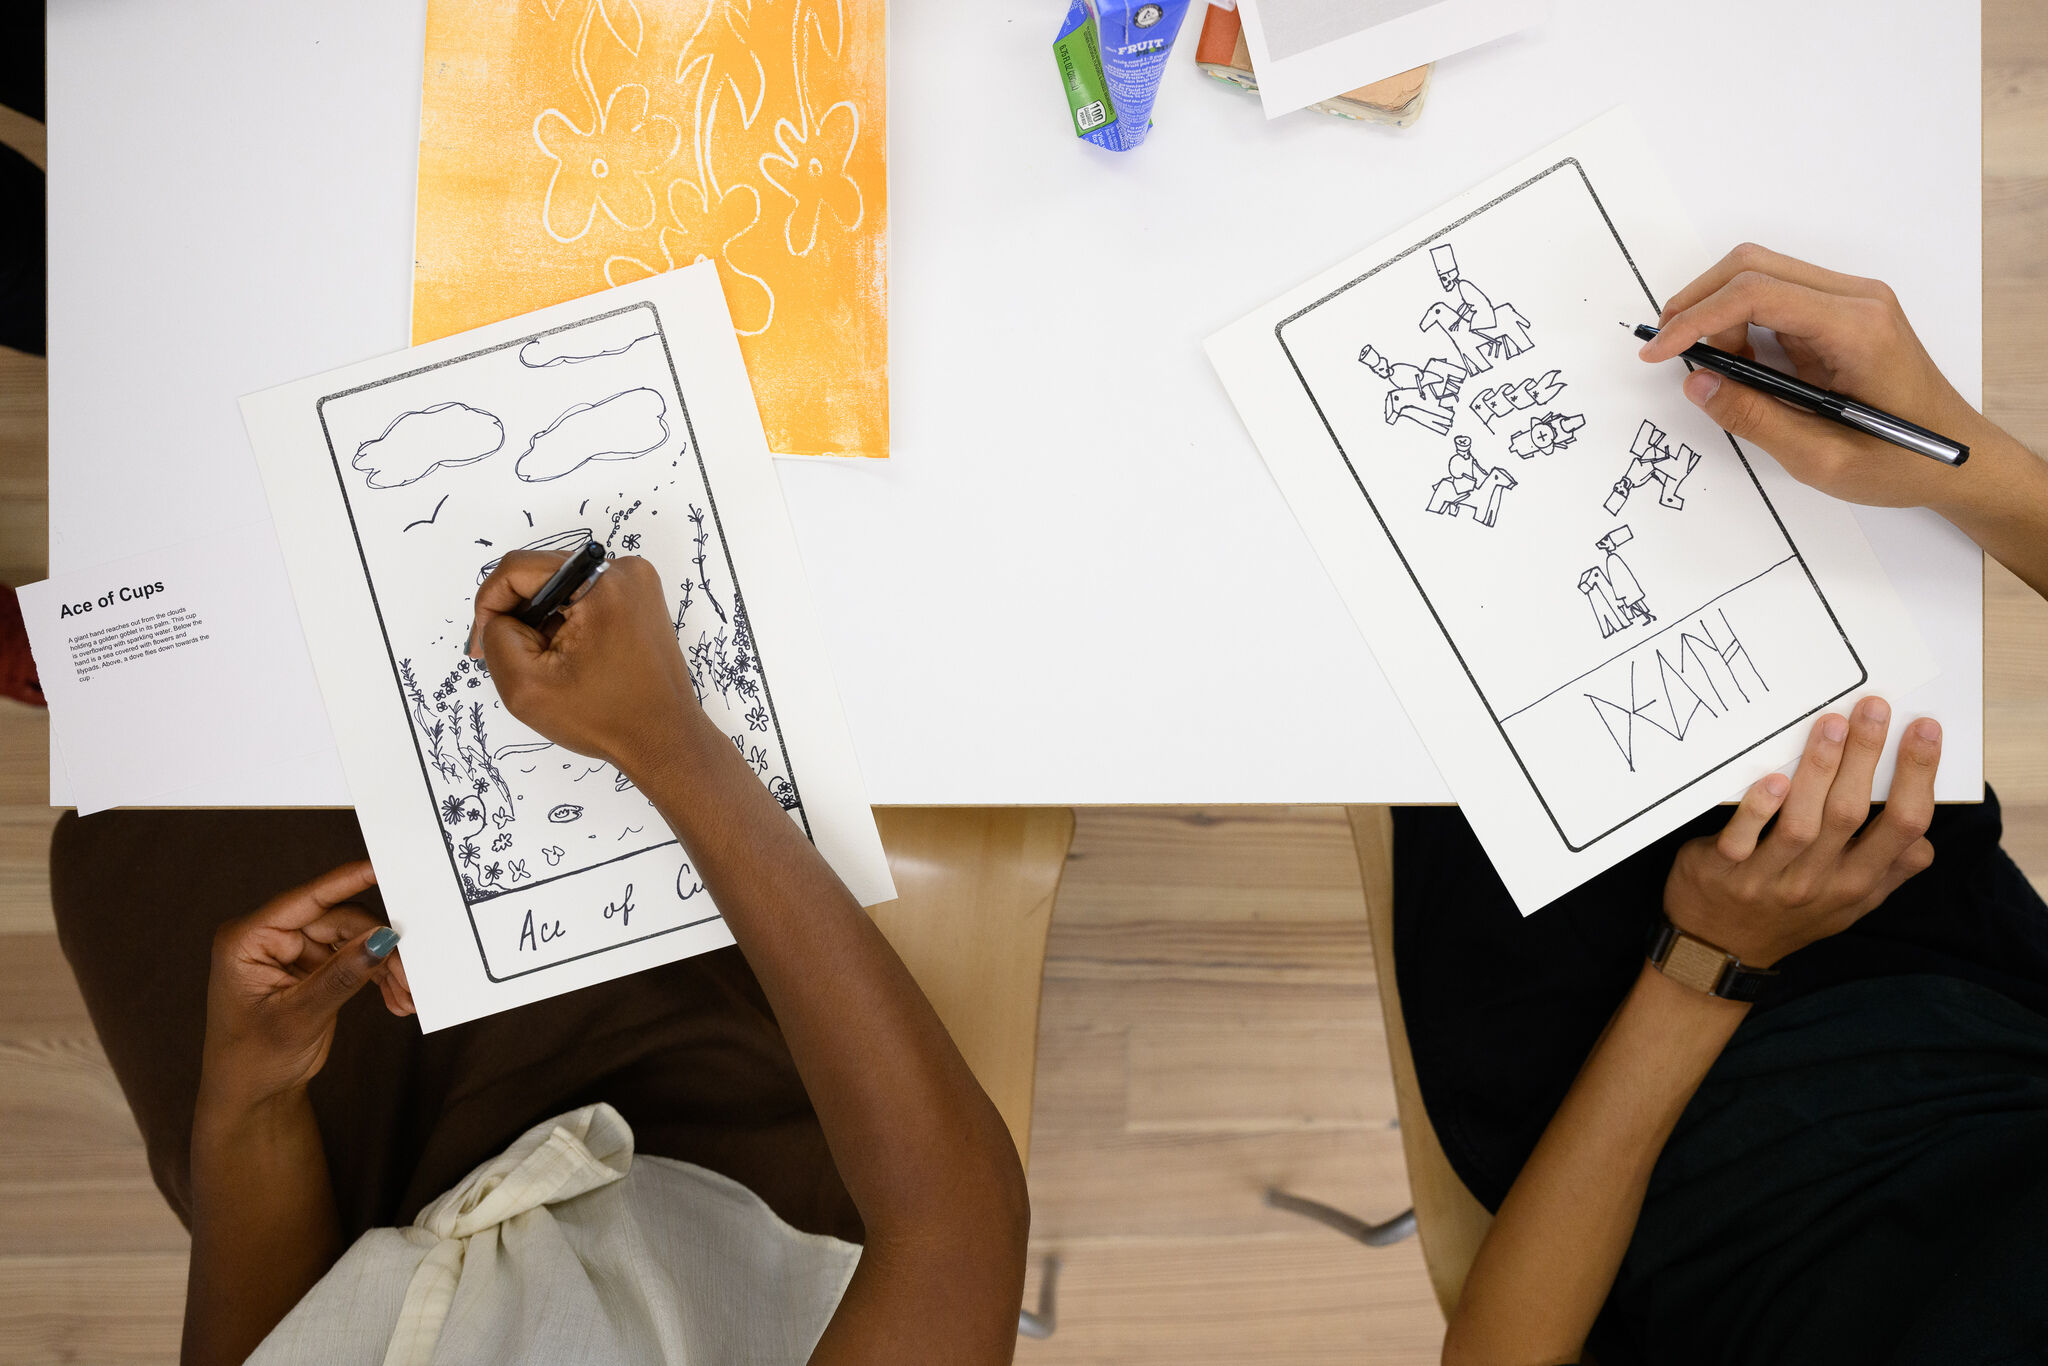 Students sit side by side.  They each have one sheet of paper and are using black markers to draw images.  In the background, there are colored pages and art materials on the table.